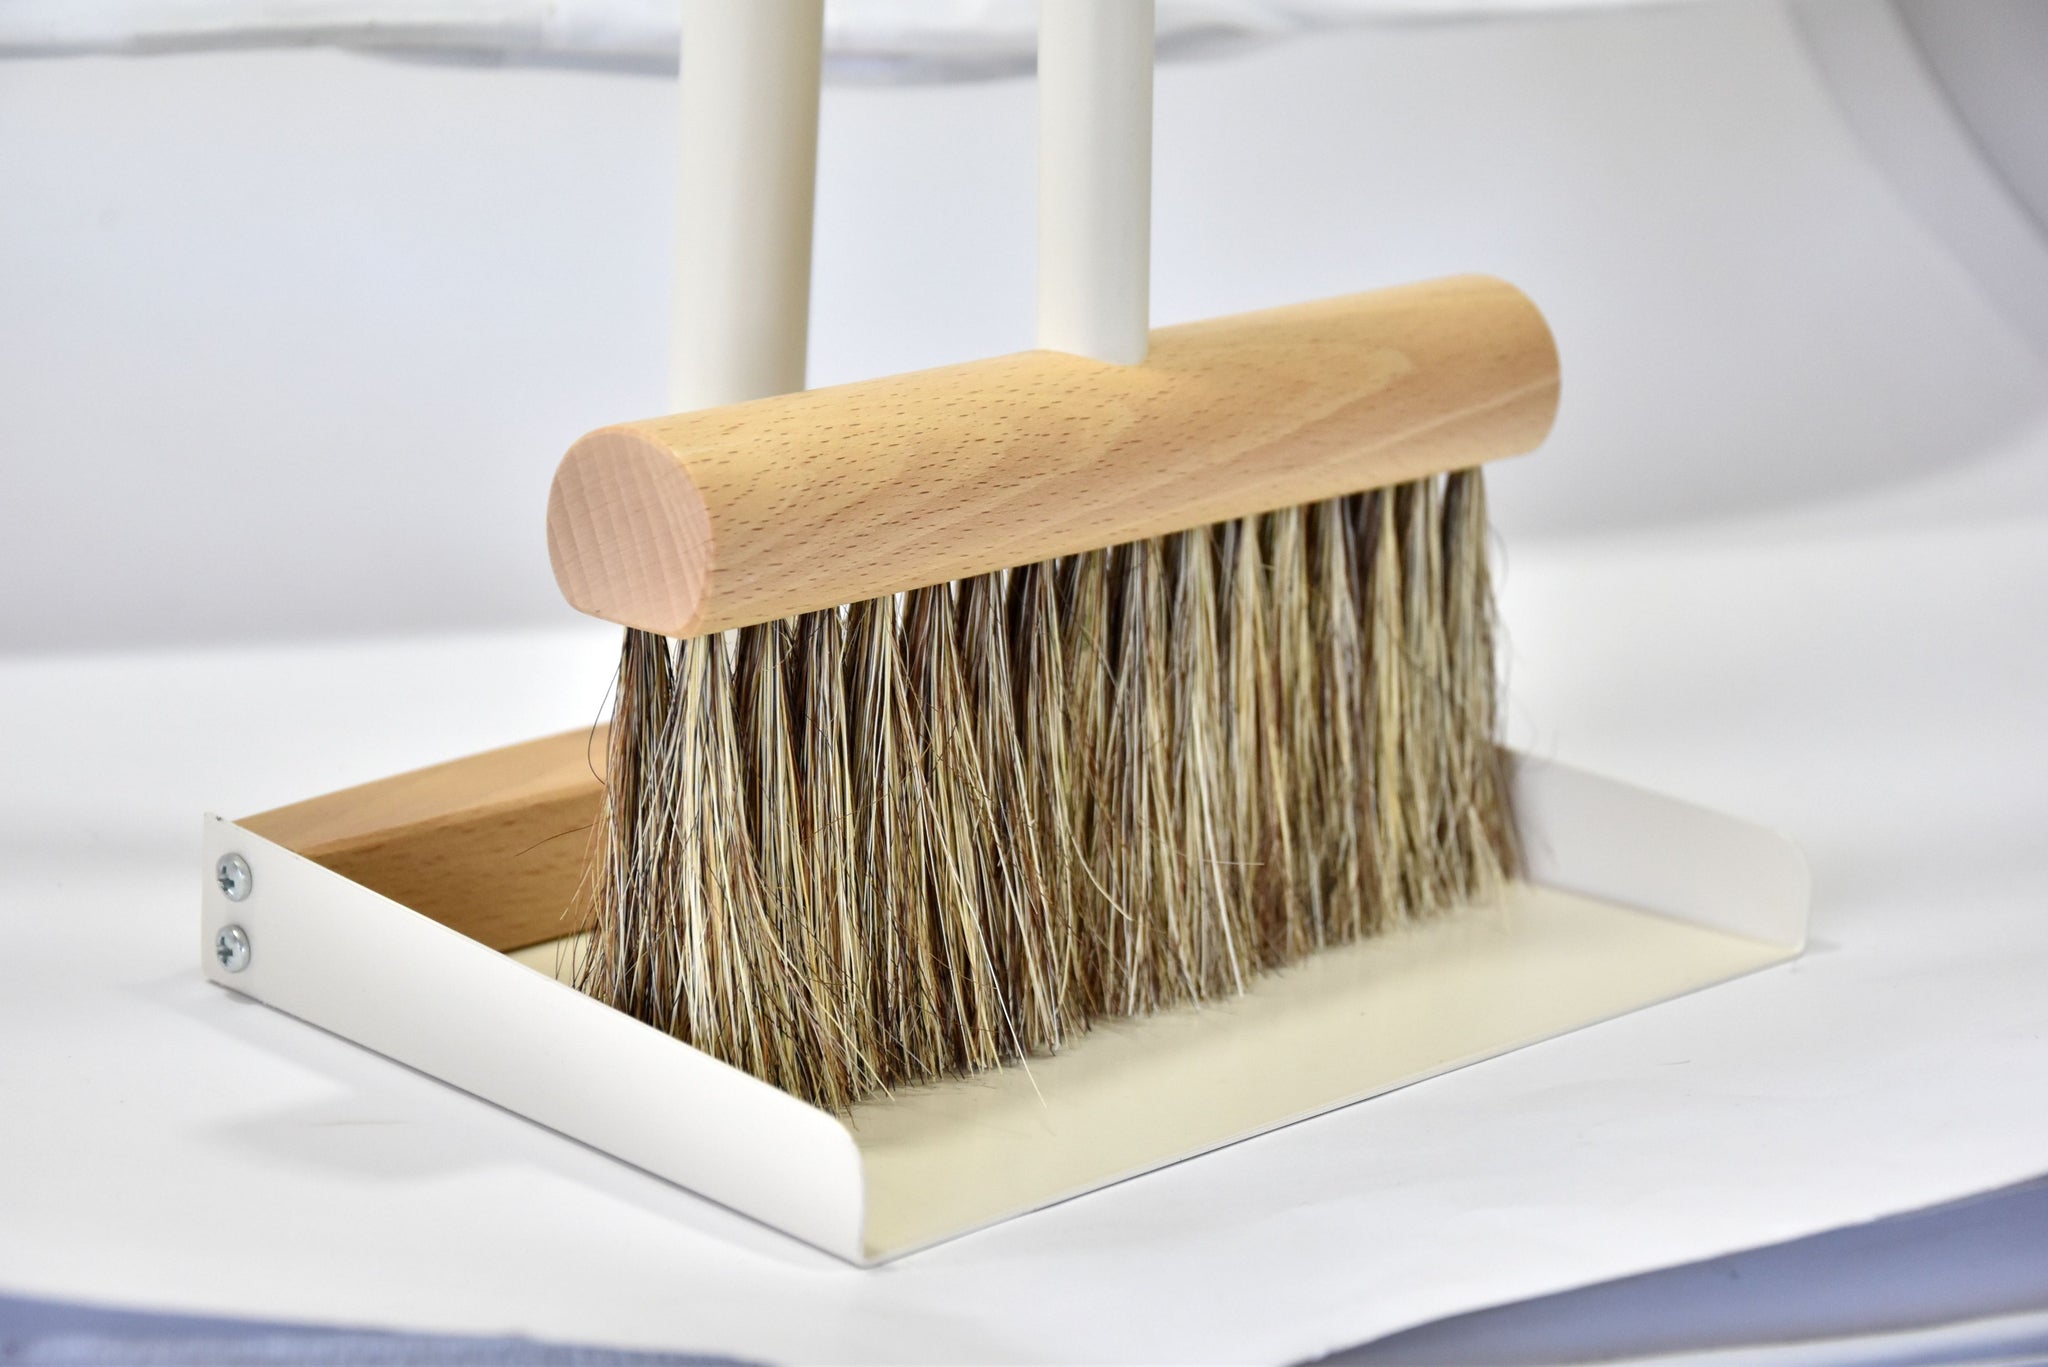 Andrée Jardin Mr. and Mrs. Clynk Natural Large Complet Dustpan and Broom in Cream